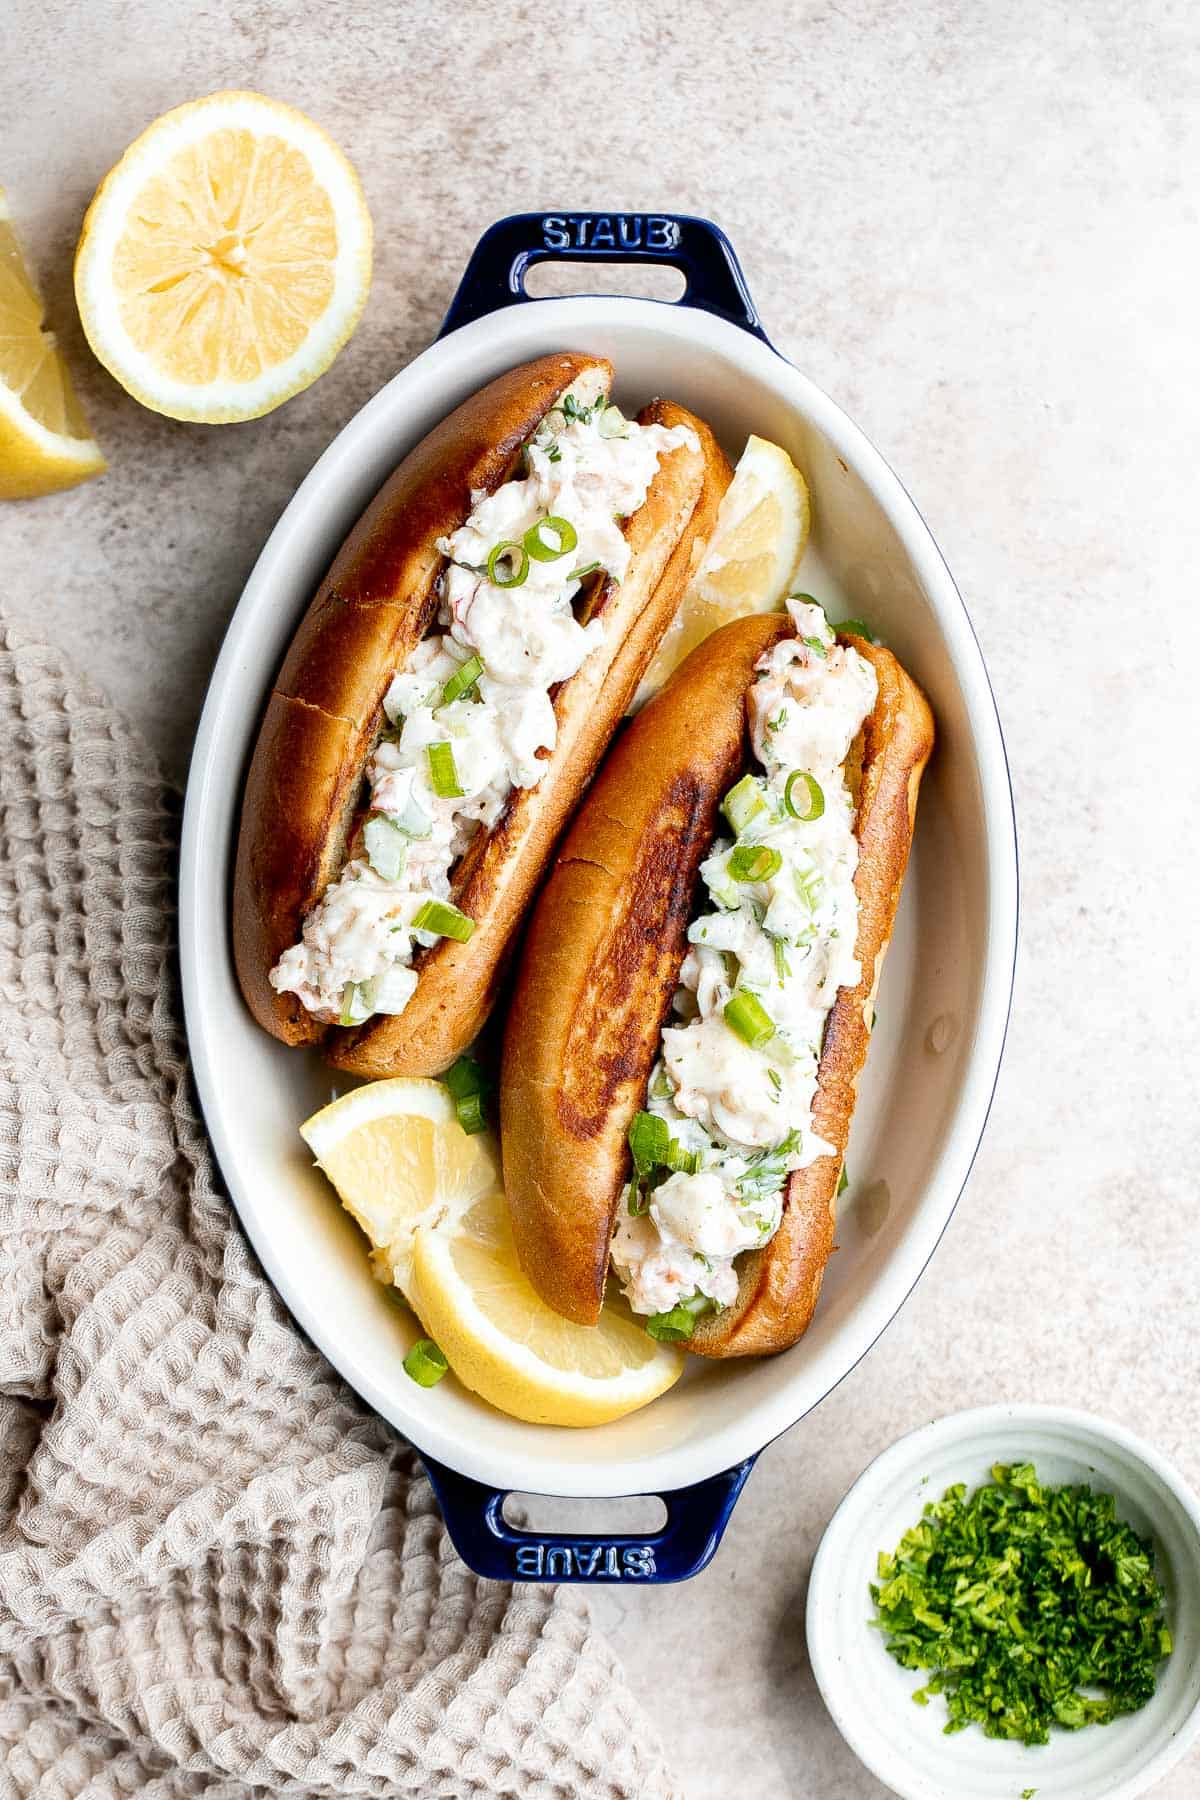 New England Lobster Rolls are a classic sandwich loaded with fresh lobster meat. Make them in just 10 minutes and serve them all summer long. | aheadofthyme.com